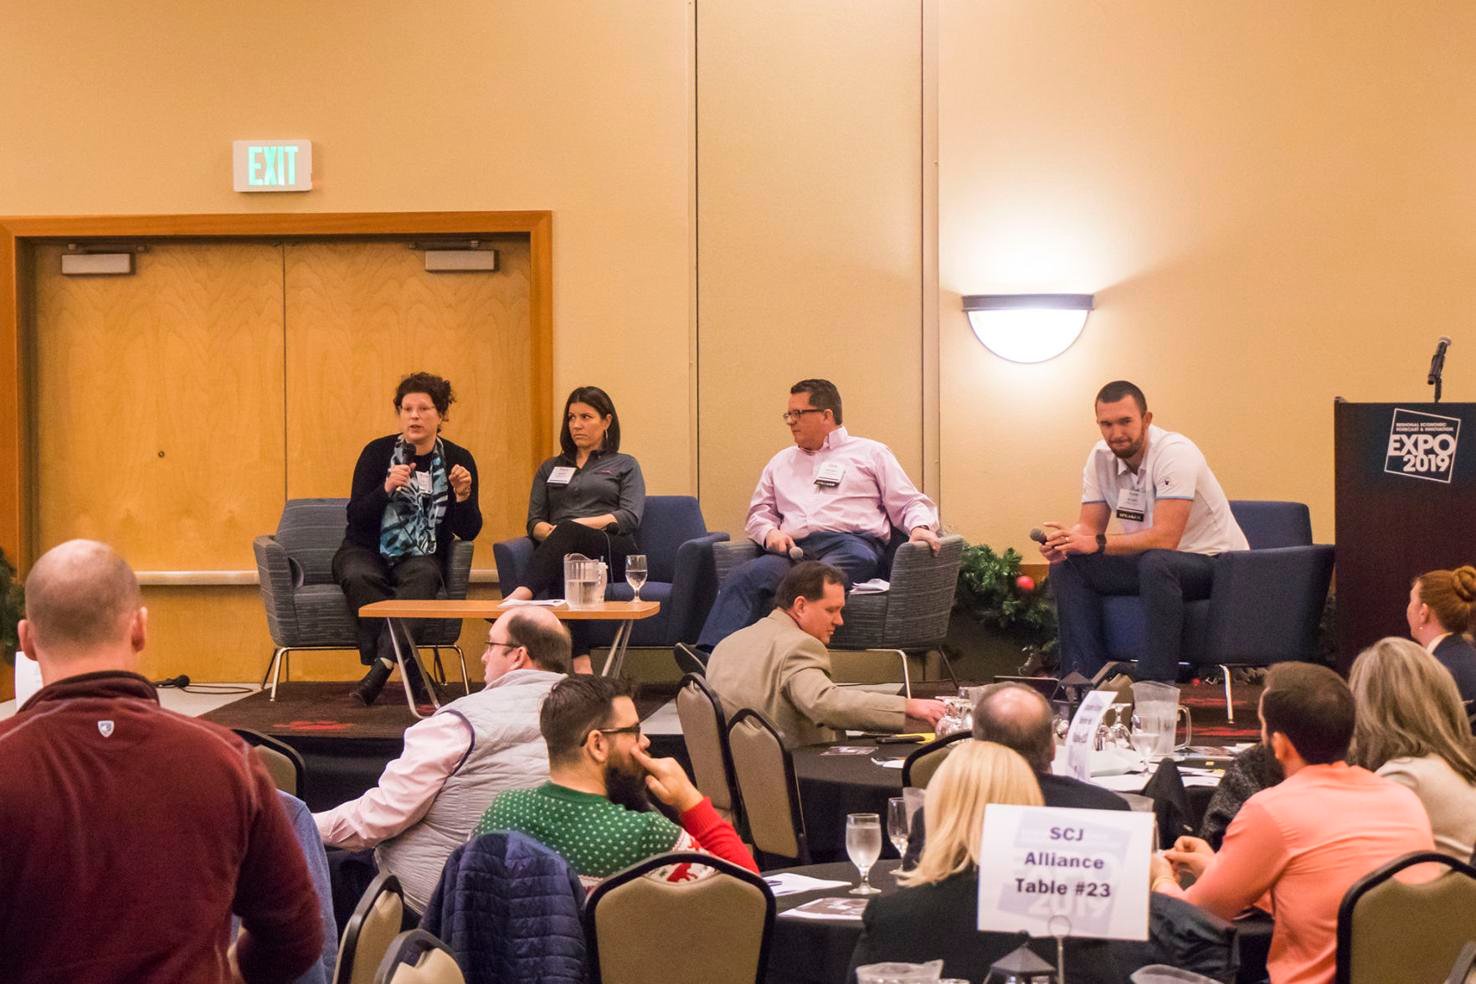 From left to right, Kate Cox, Tracie Schmitt, Chris Richardson, and Nate Burgher talk on stage during the Regional Economic Forecast & Innovation Expo hosted at Great Wolf Lodge in December 2019.